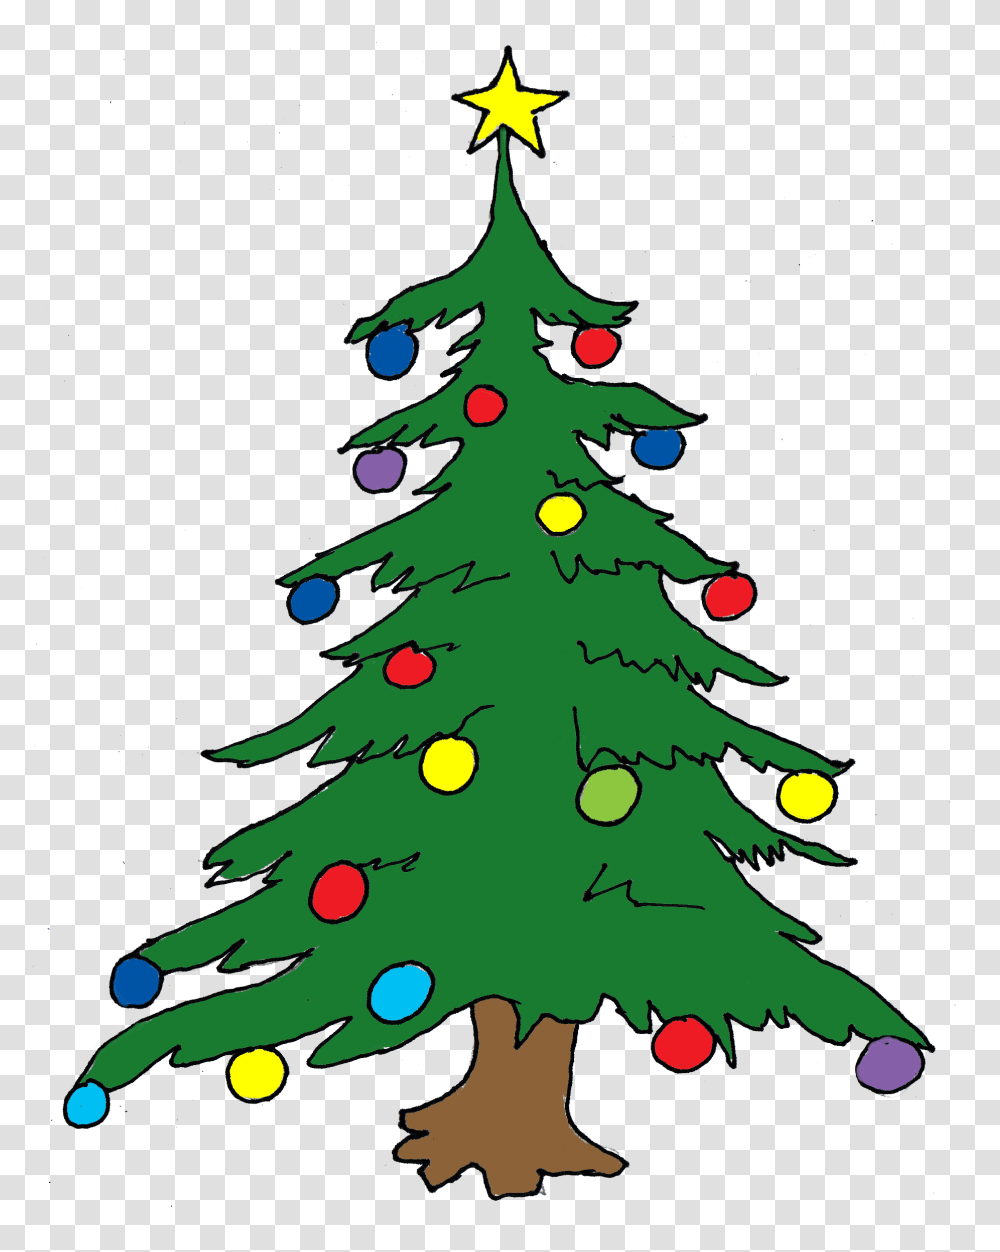 Christmas Tree Vec Free Clipart Grinch Stole Christmas Tree, Plant, Ornament, Star Symbol Transparent Png